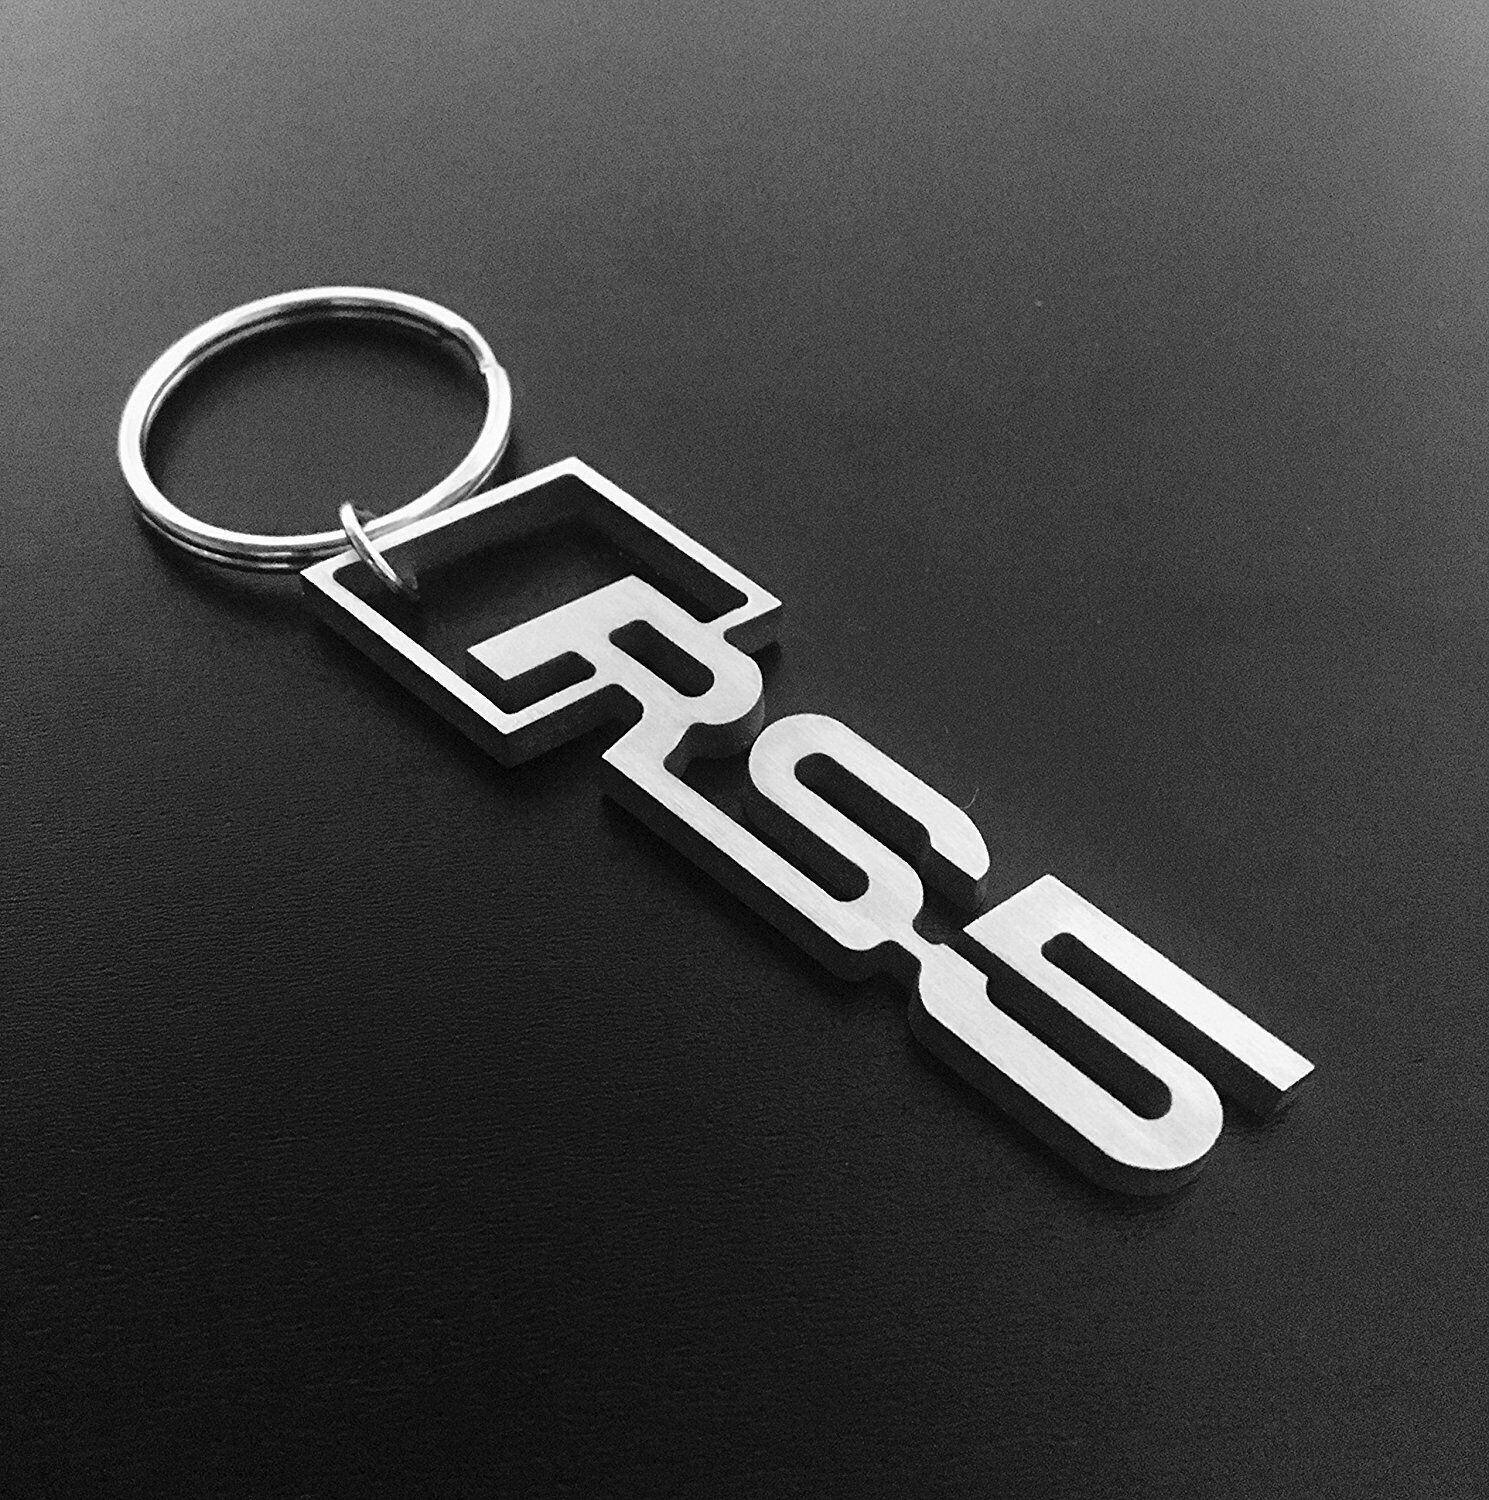 Audi RS5 Key Chain, Stainless steel